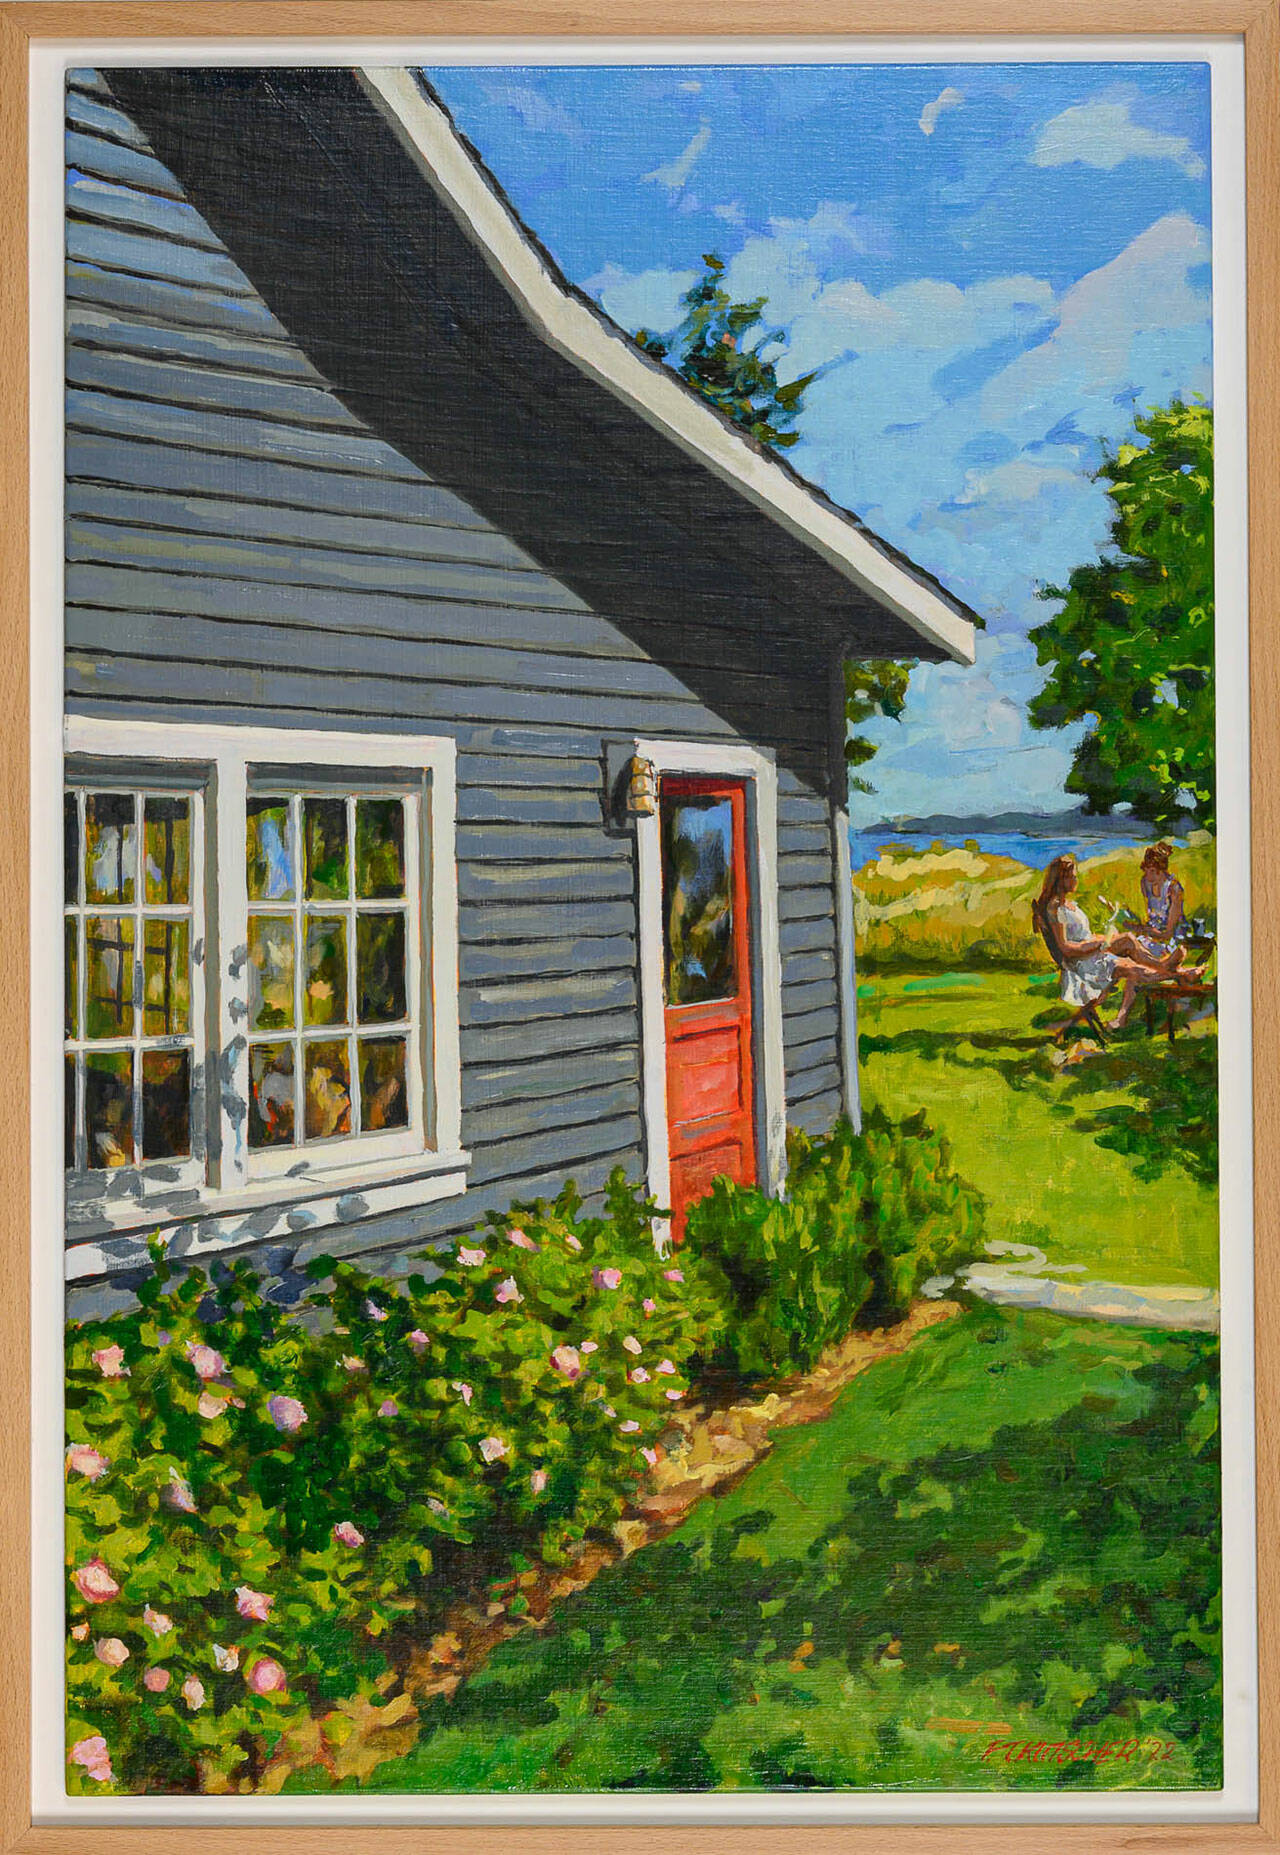 This oil painting by Ted Kutchner is up for bid in a month-long silent auction to benefit Vashon Center for the Arts. (Courtesy Photo)